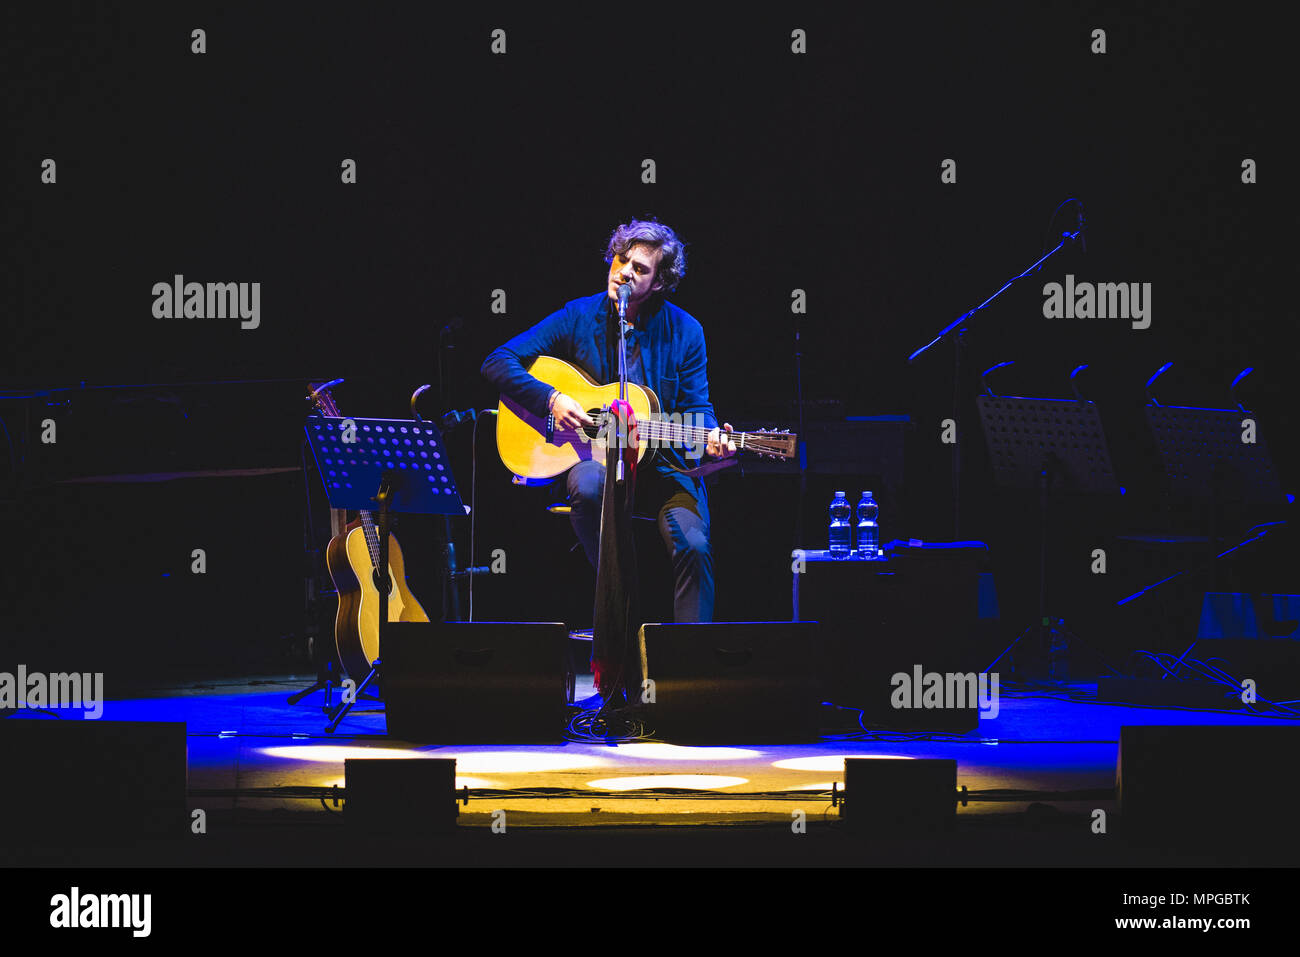 Turin, Italy, 2018 May 23rd: The british/italian singer and song writer Jack Savoretti performing live on stage at the Teatro Alfieri for his "Acustic Nights Live" tour concert. Photo: Alessandro Bosio/Alamy Live News Stock Photo